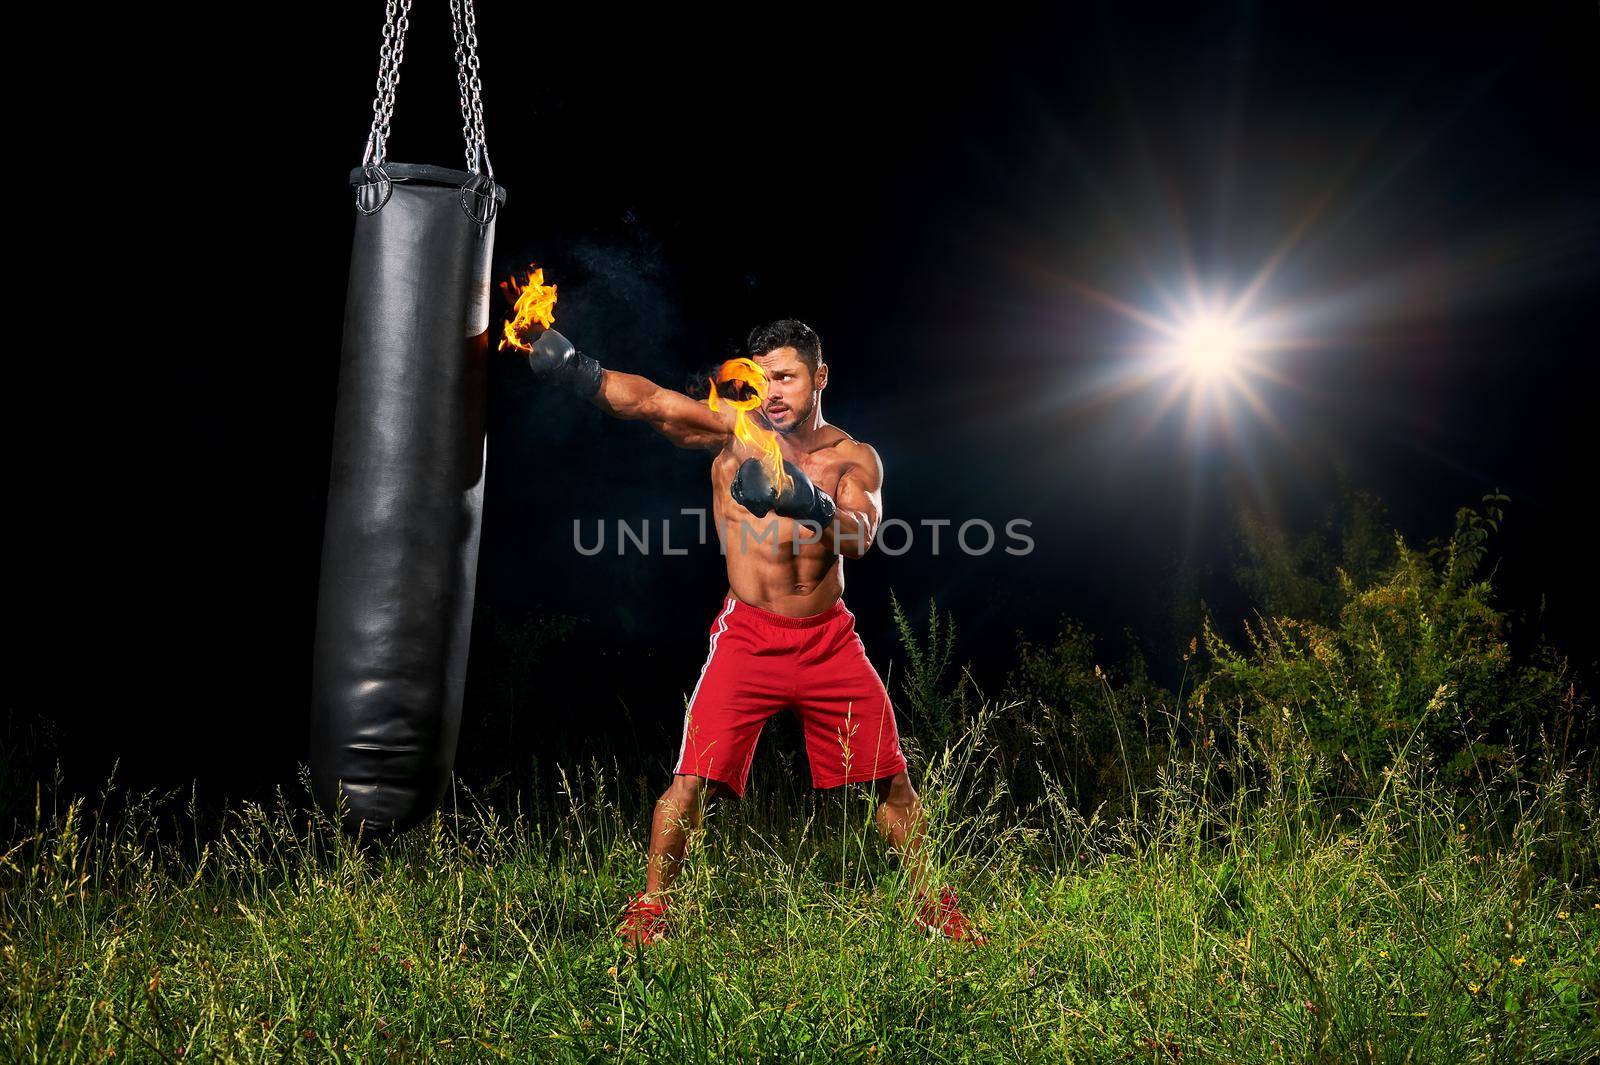 Shirtless muscular male boxer training outdoors at night exercising on a punching bag with his boxing gloves burning with fire copyspace fitness lifestyle forceful powerful confidence athlete.